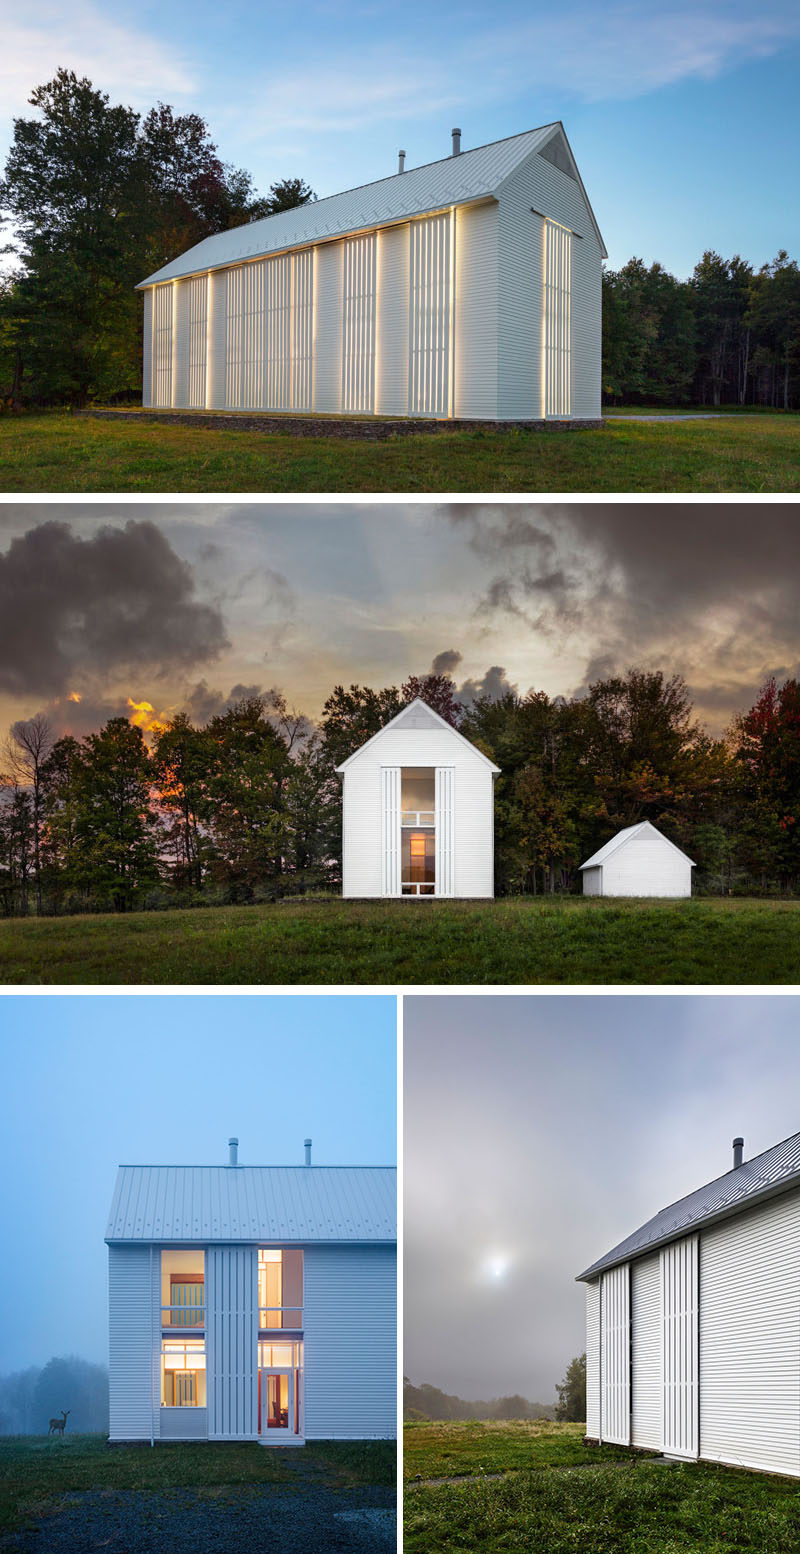 Cutler Anderson Architects have completed a modern farmhouse for a large family on a 93-acre farm in northeastern Pennsylvania, that was designed to fit in with the surrounding farming community. #Farmhouse #ModernArchitecture